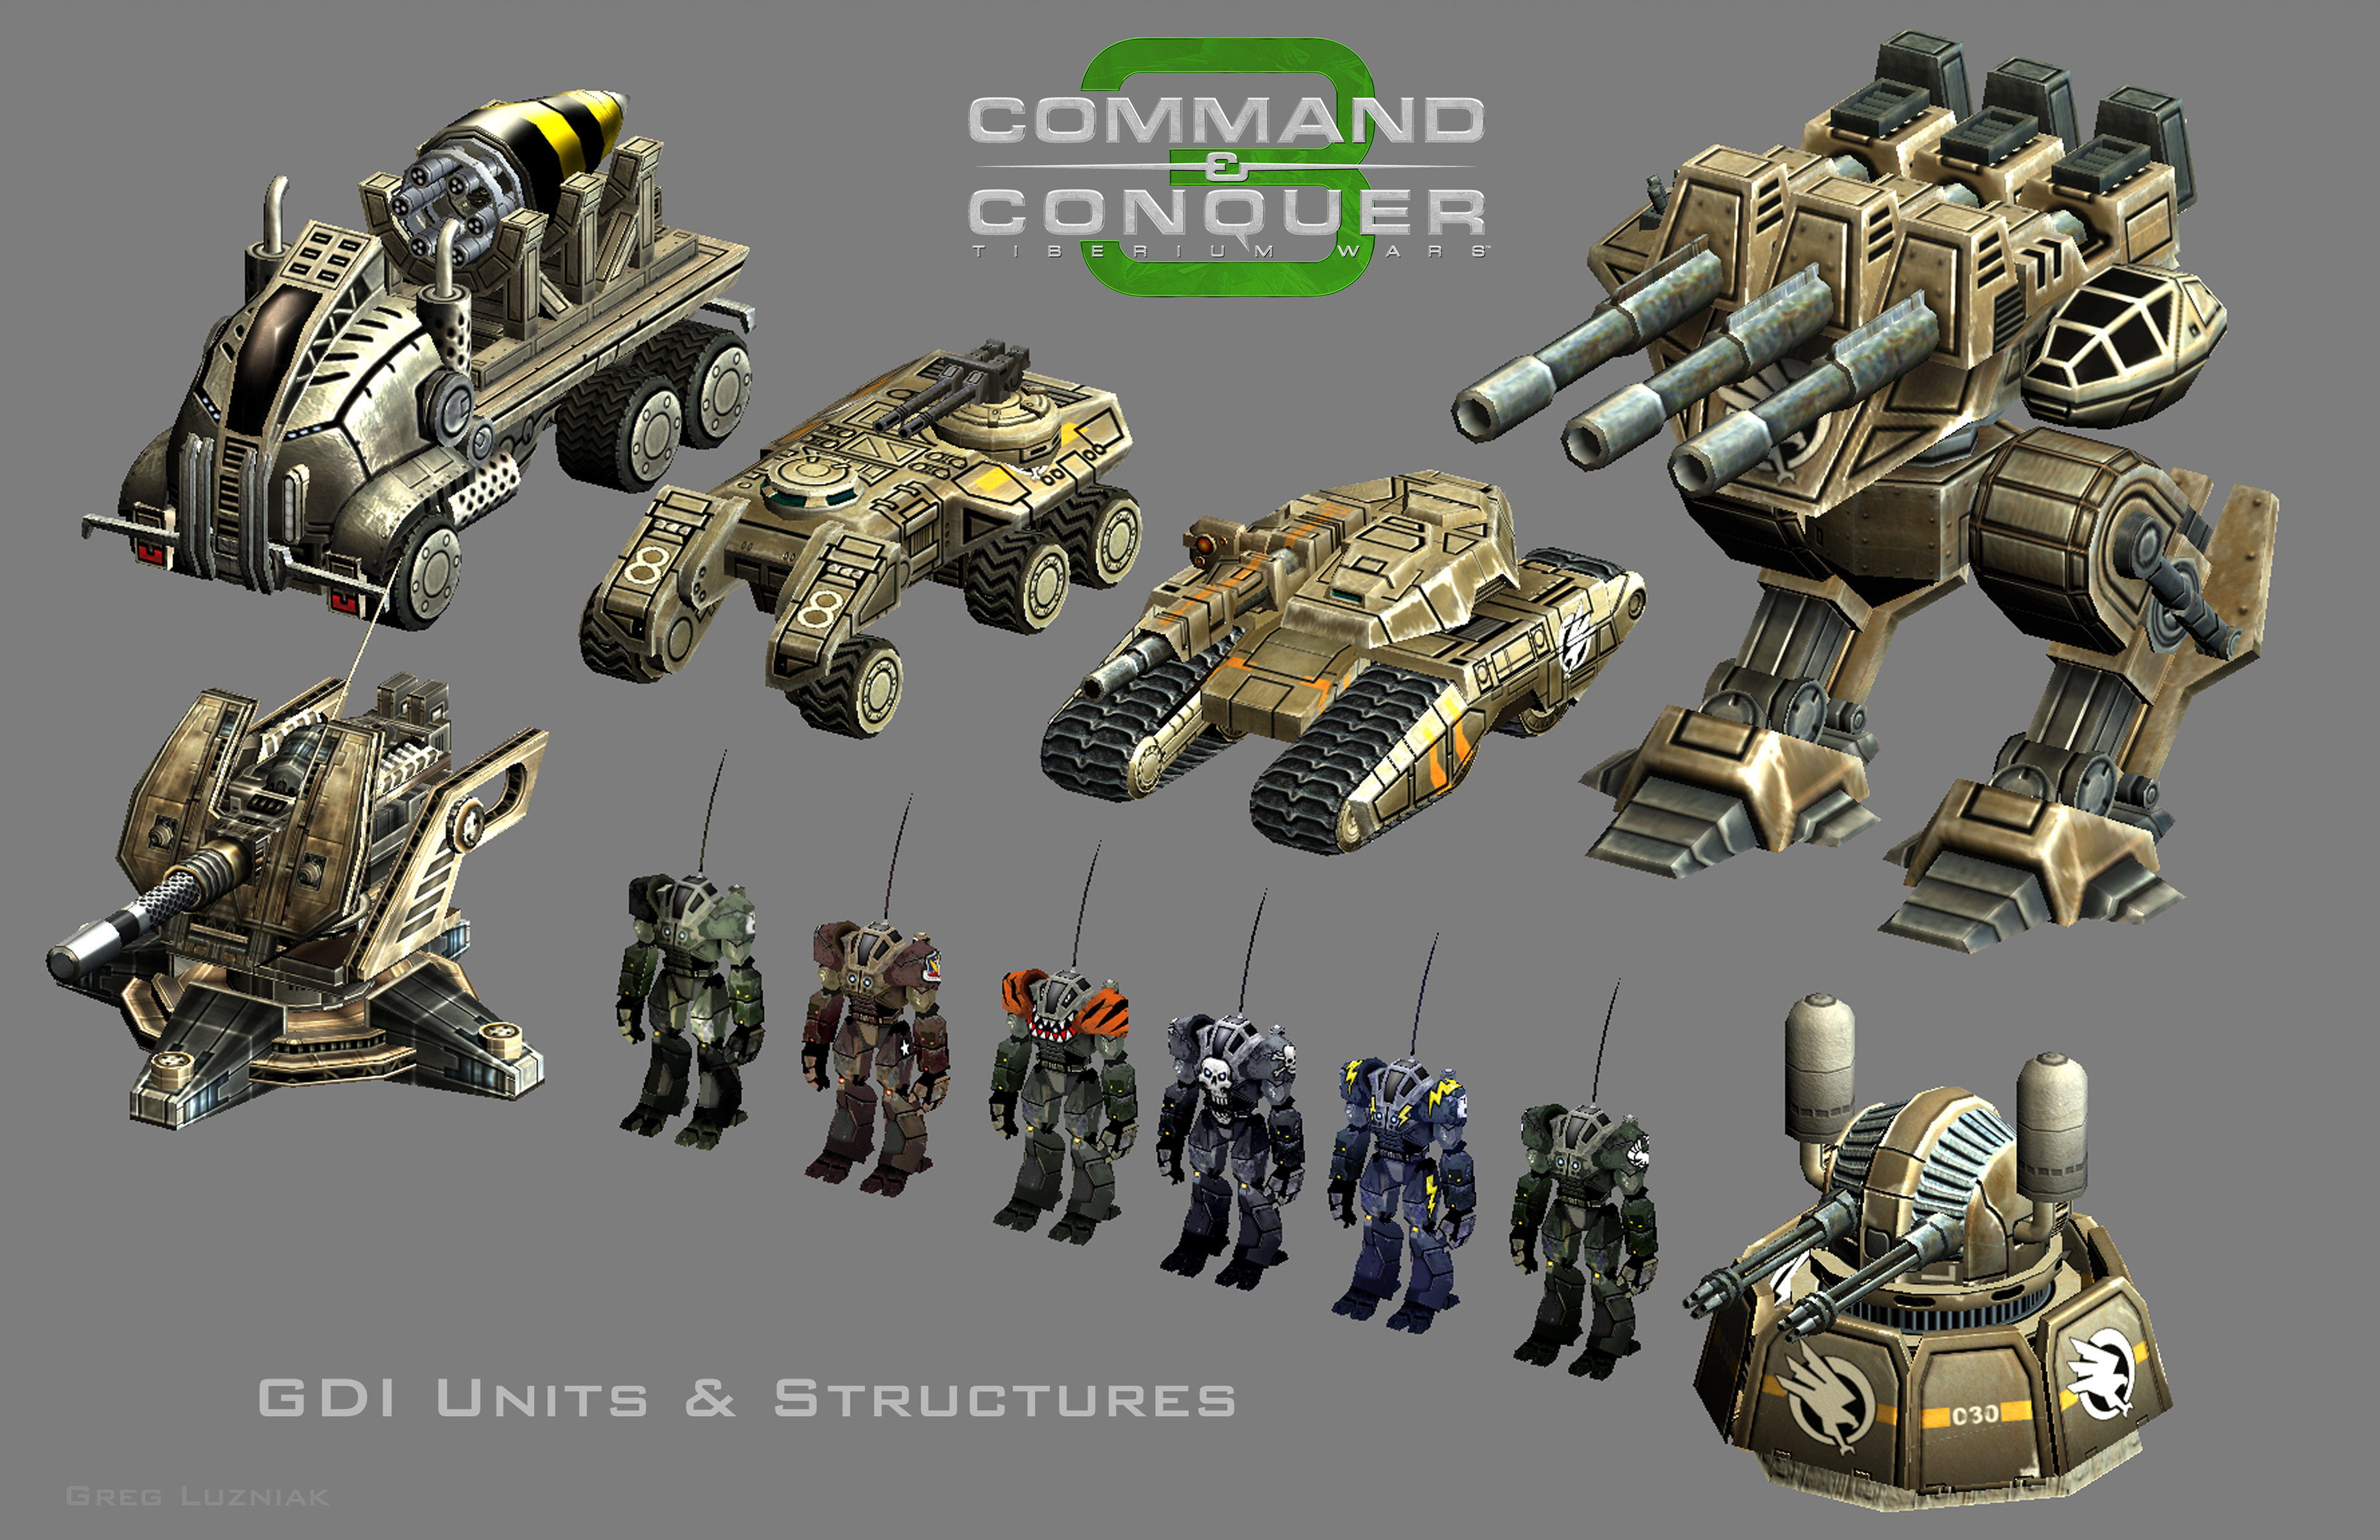 Command Conquer 4 юниты ГСБ